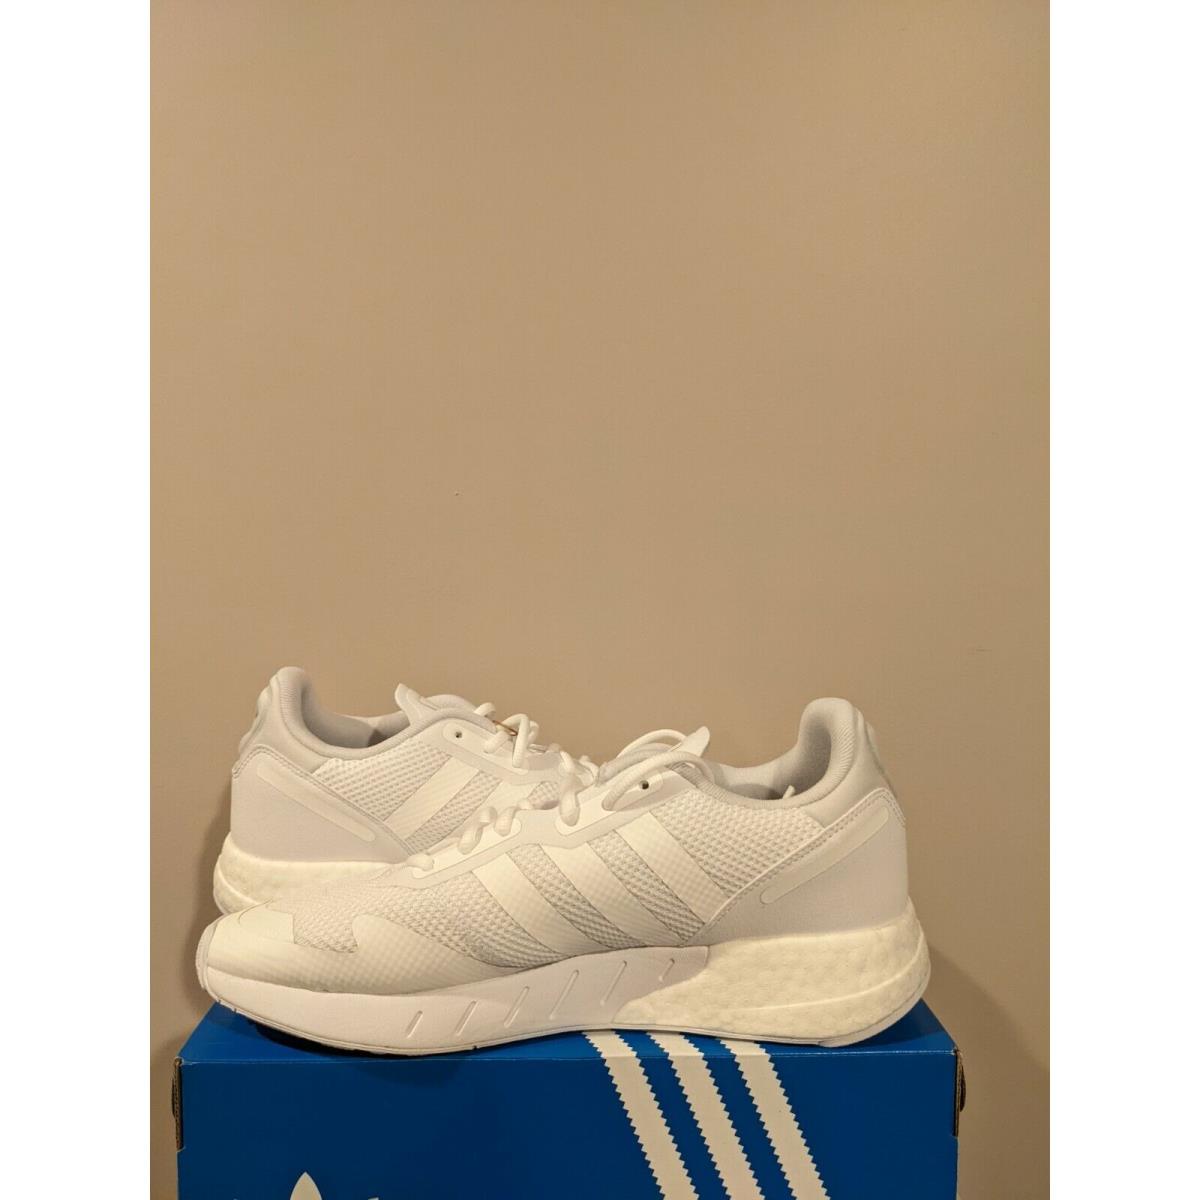 Adidas Men`s ZX 1K Boost Shoes Size 11 | 692740785561 - Adidas 